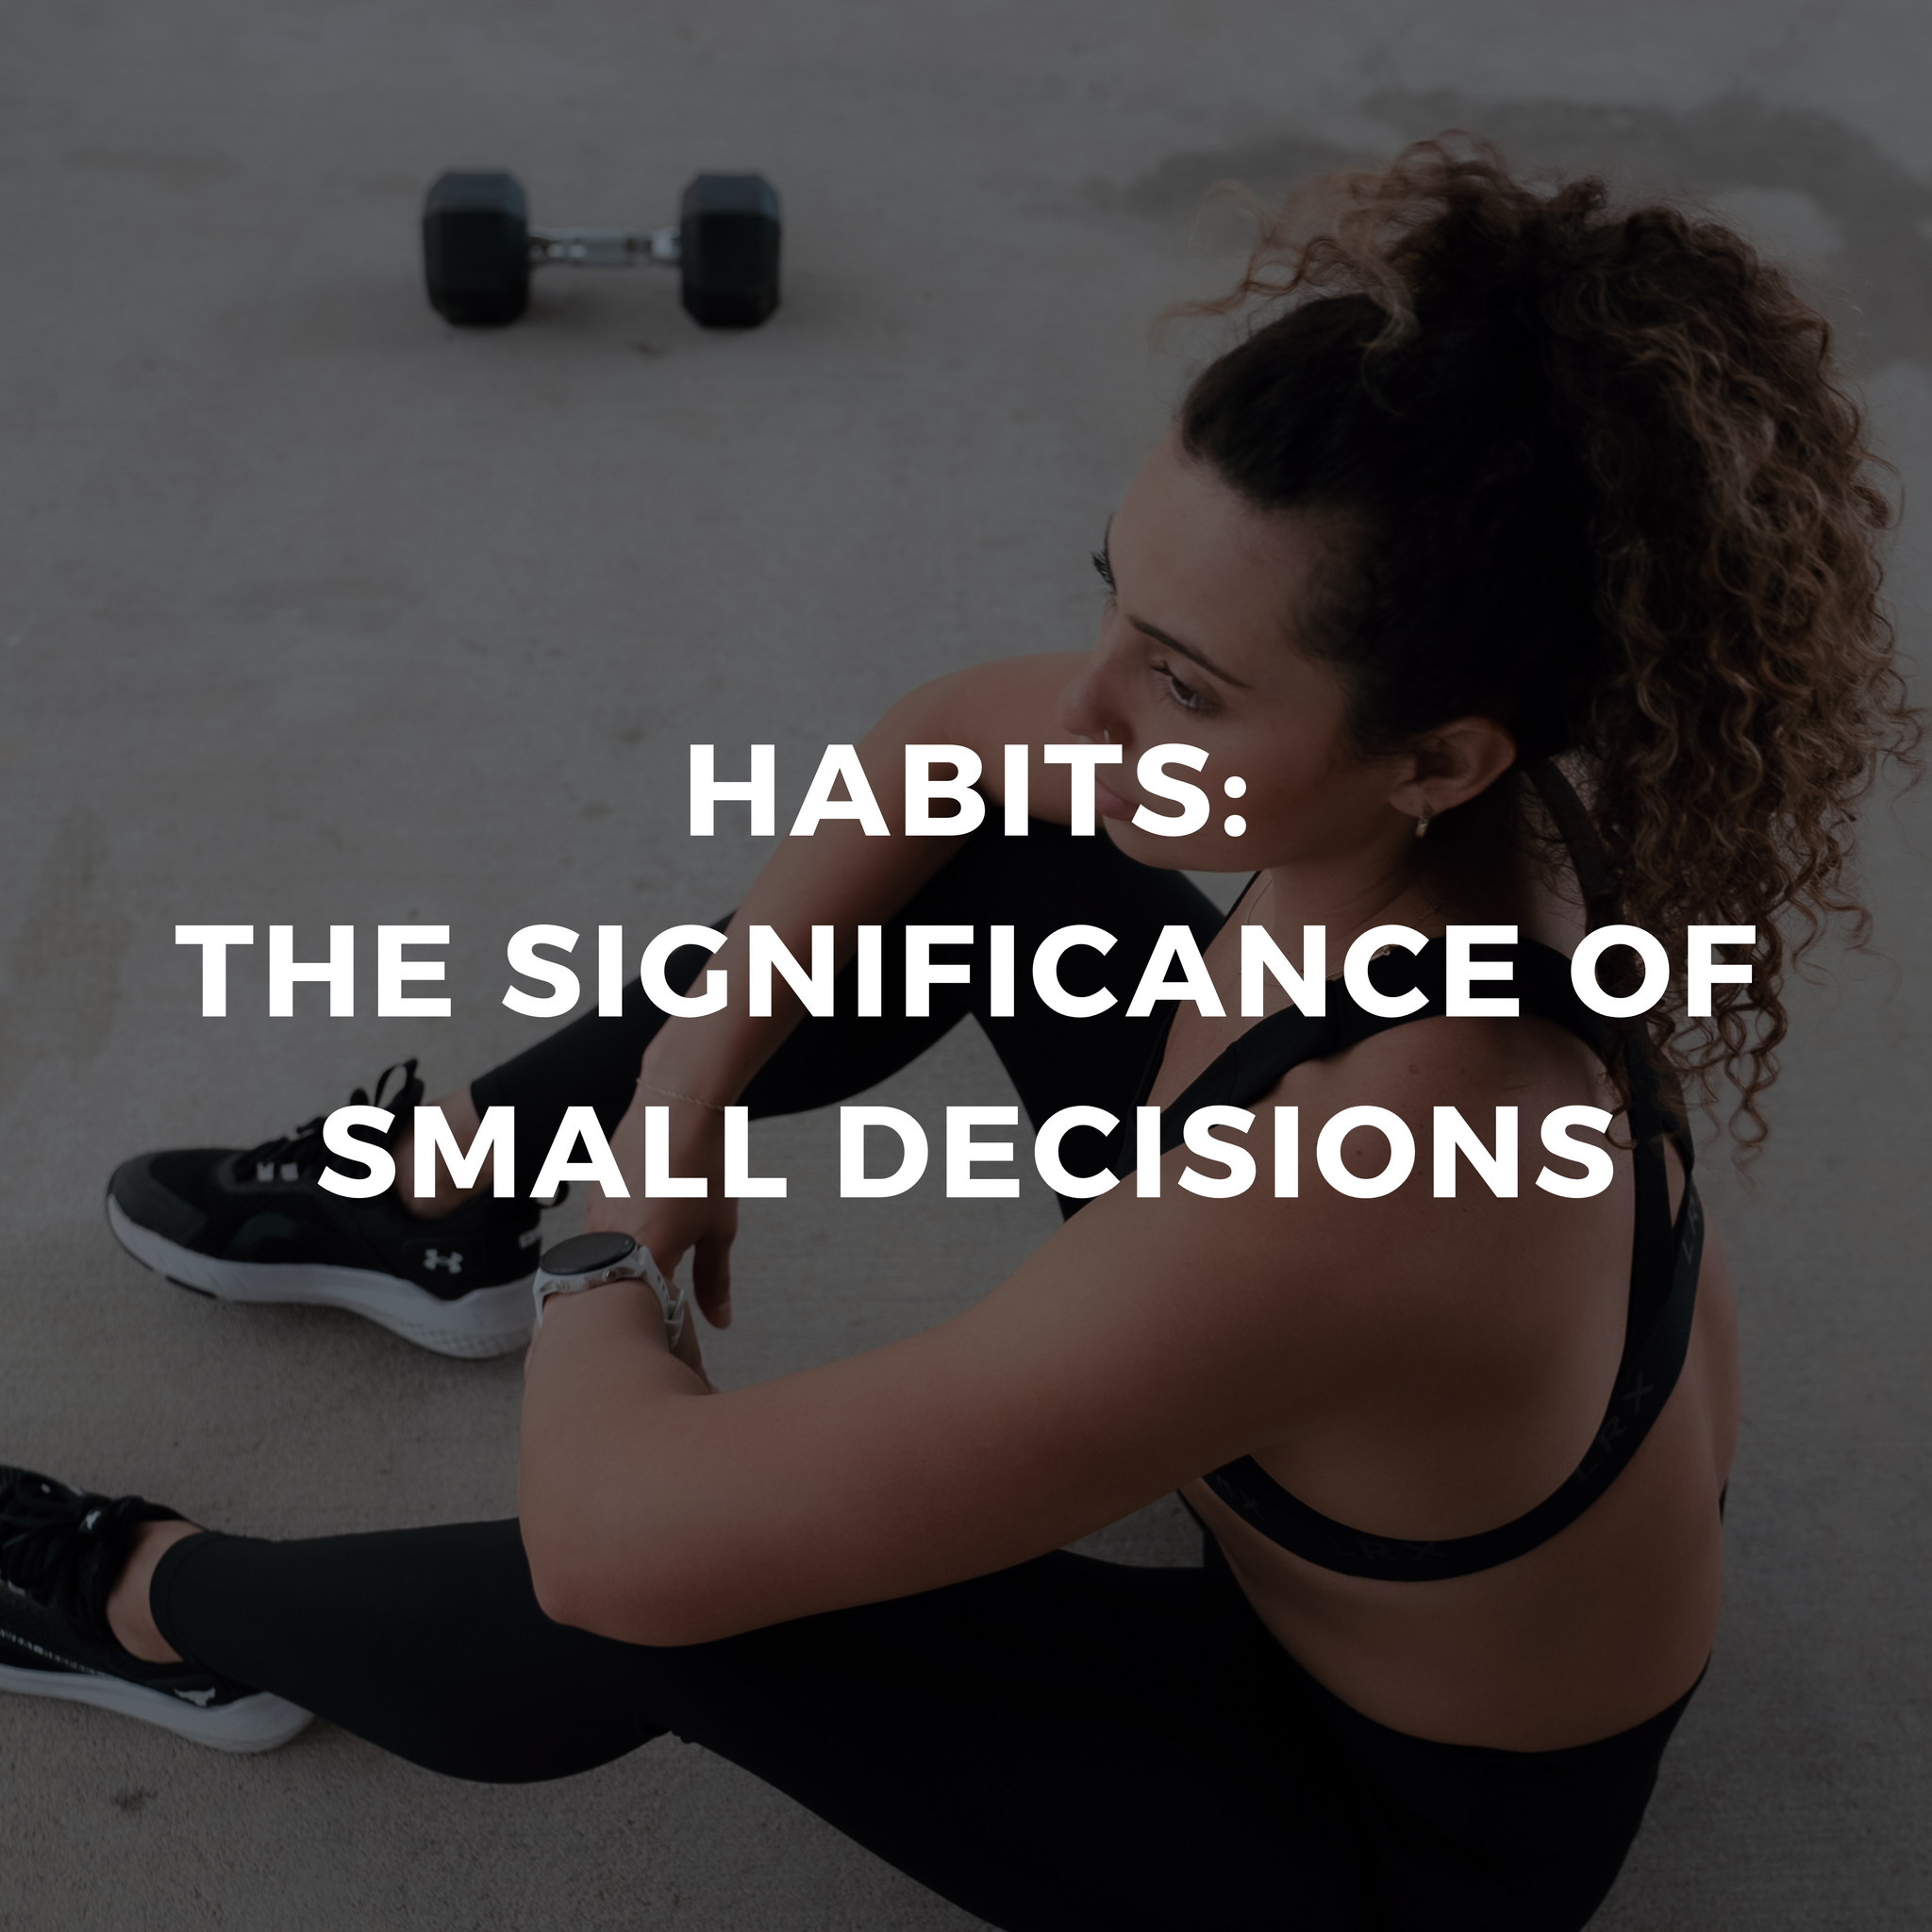 Habits: The Significance of Small Decisions